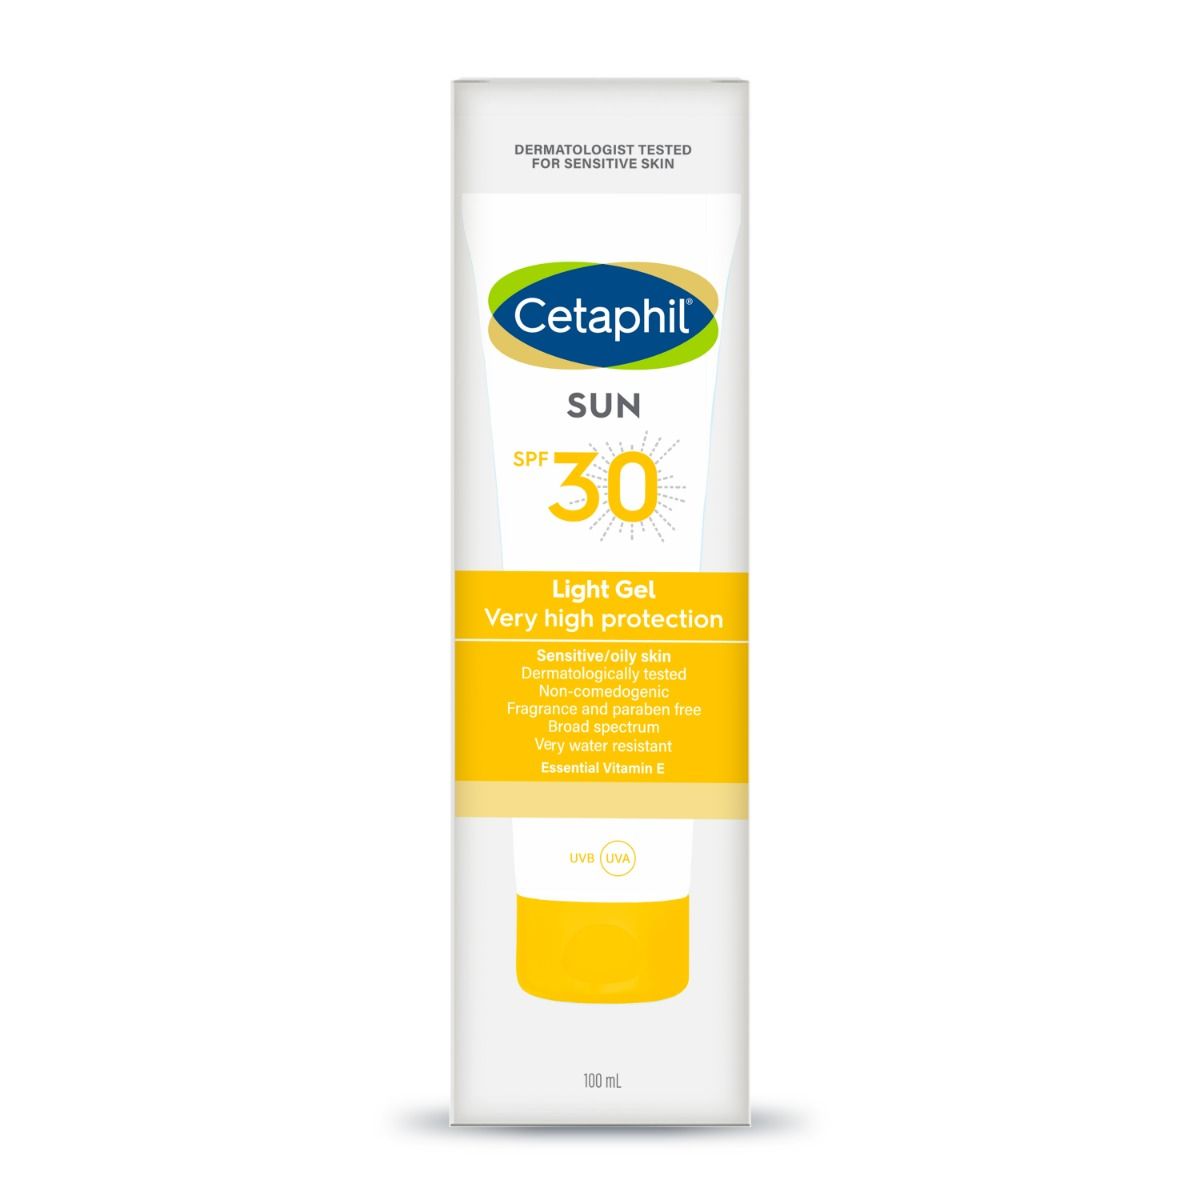 Cetaphil Sun SPF 30 Very High Protection Light Gel, 100 ml, Pack of 1 